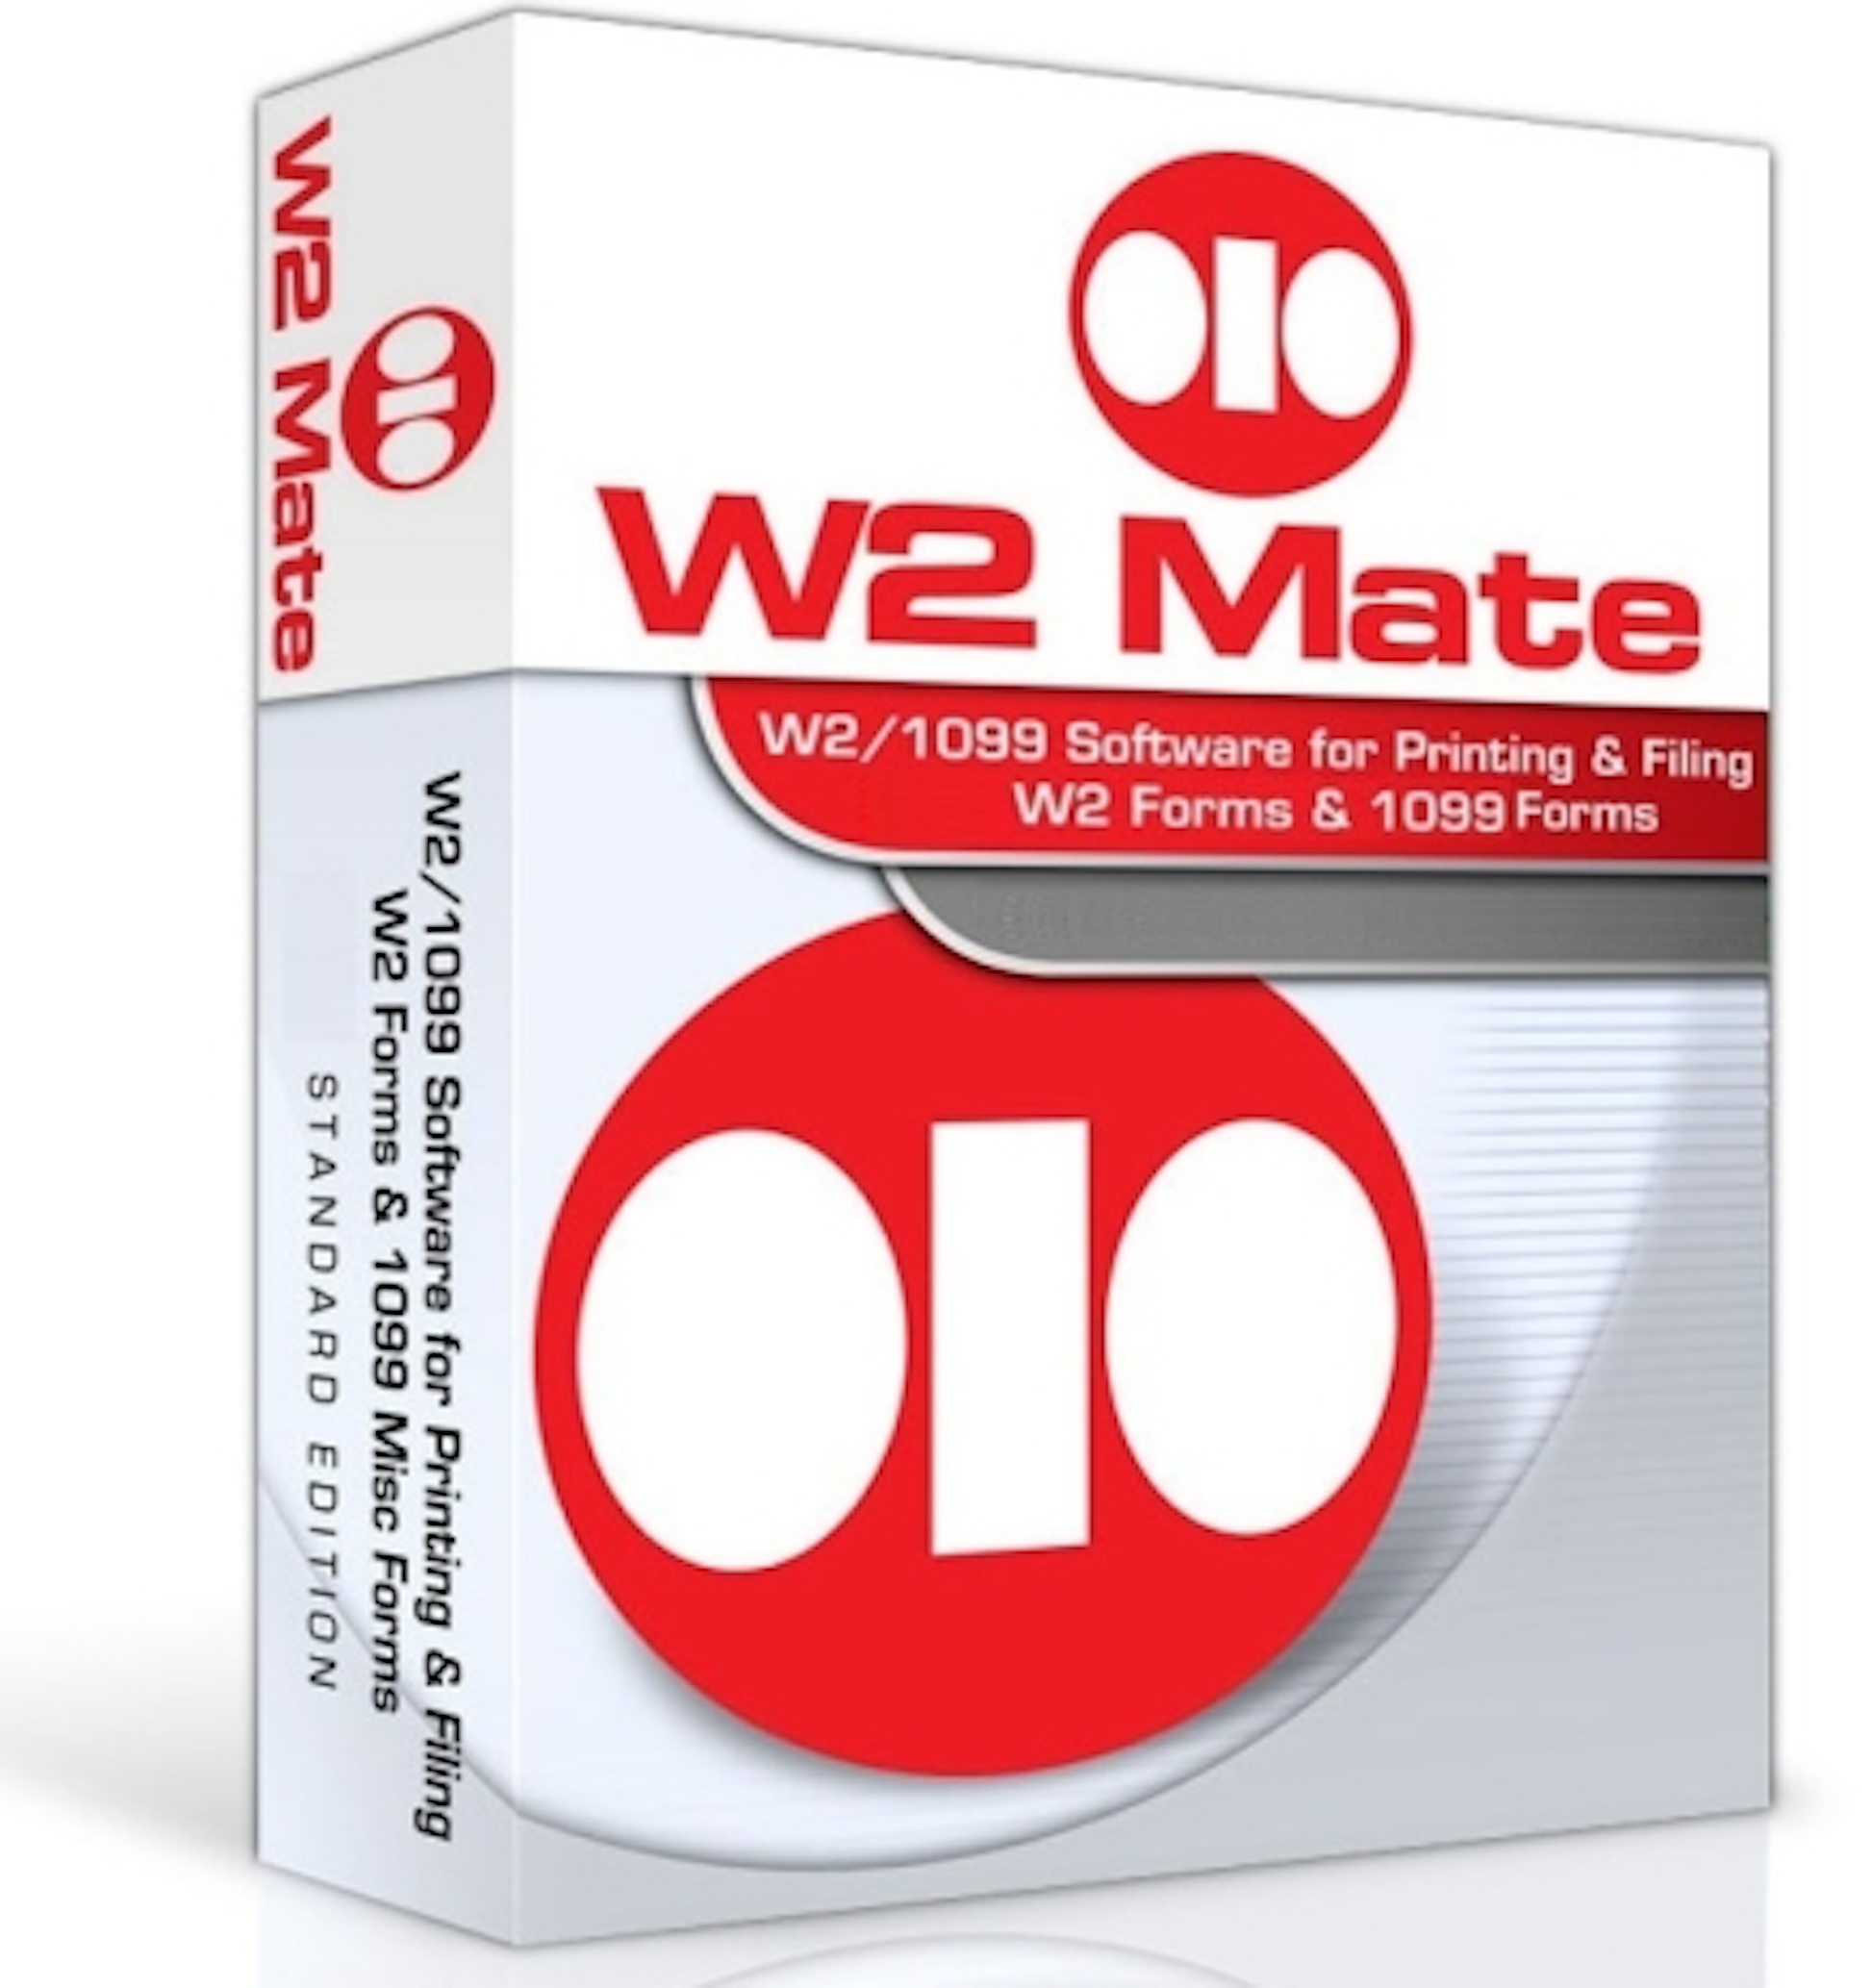 W2 Mate Pricing, Features, Reviews & Alternatives GetApp